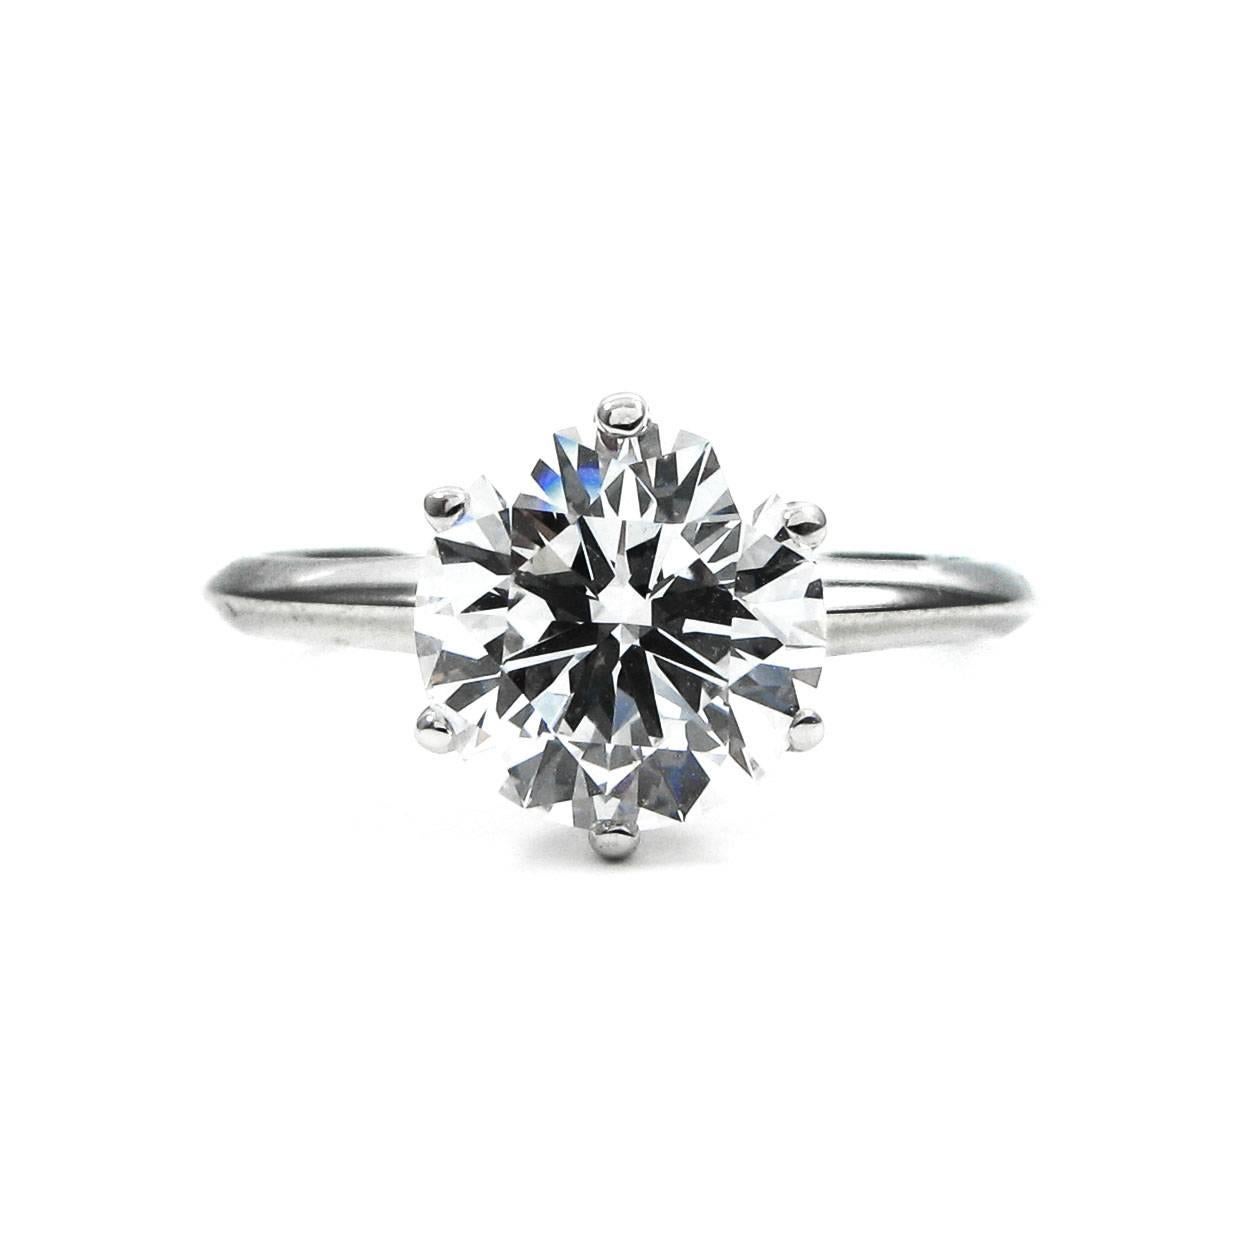 The ultimate, quintessential classic is a Tiffany solitaire engagement ring. This gorgeous platinum solitaire by Tiffany & Co is perfect for someone looking for a timeless, romantic piece. The ring features a 2.08 carat round diamond certified by